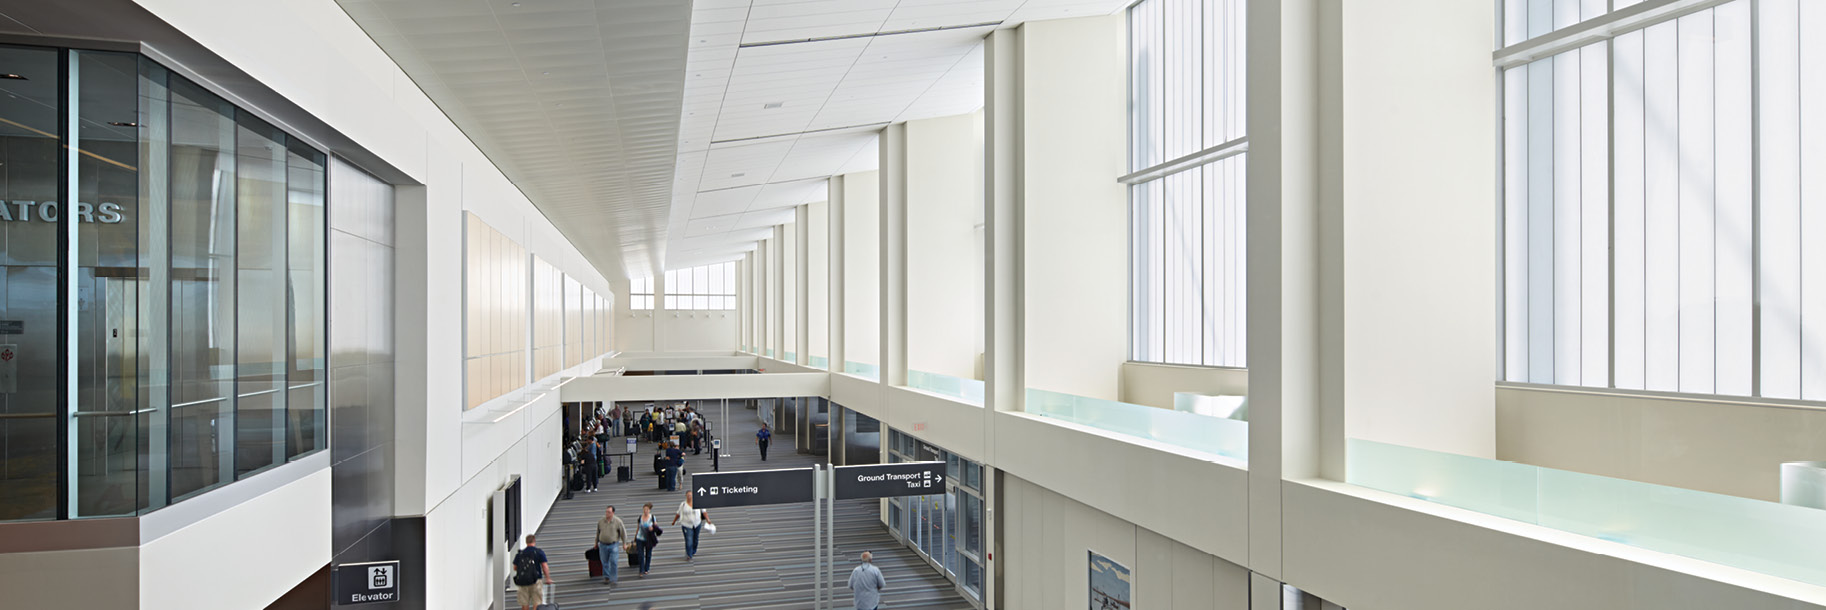 Interior of Raleigh-Durham International Airport featuring Kalwall facades on exterior-facing wall